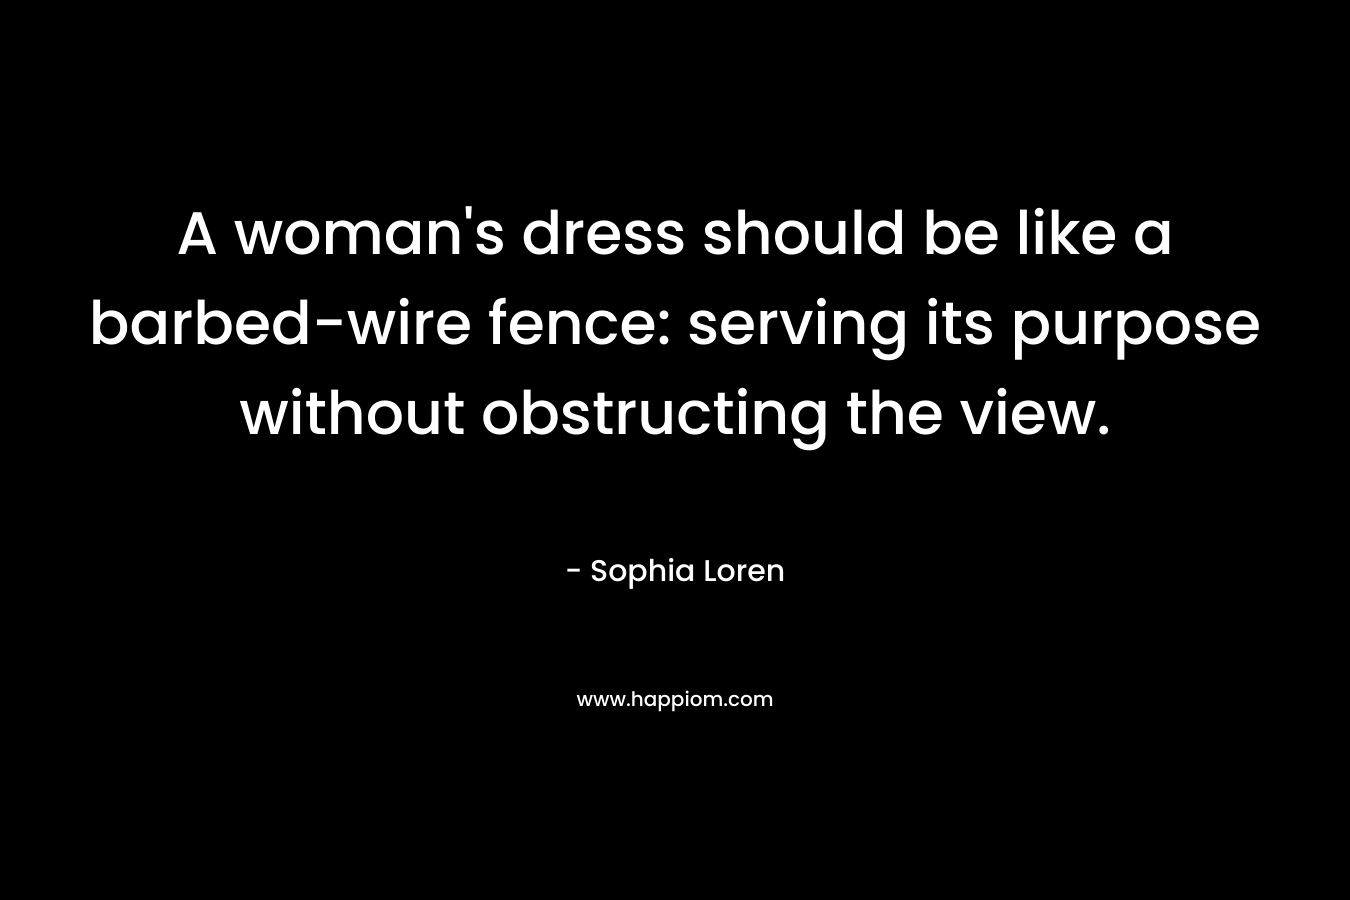 A woman's dress should be like a barbed-wire fence: serving its purpose without obstructing the view.